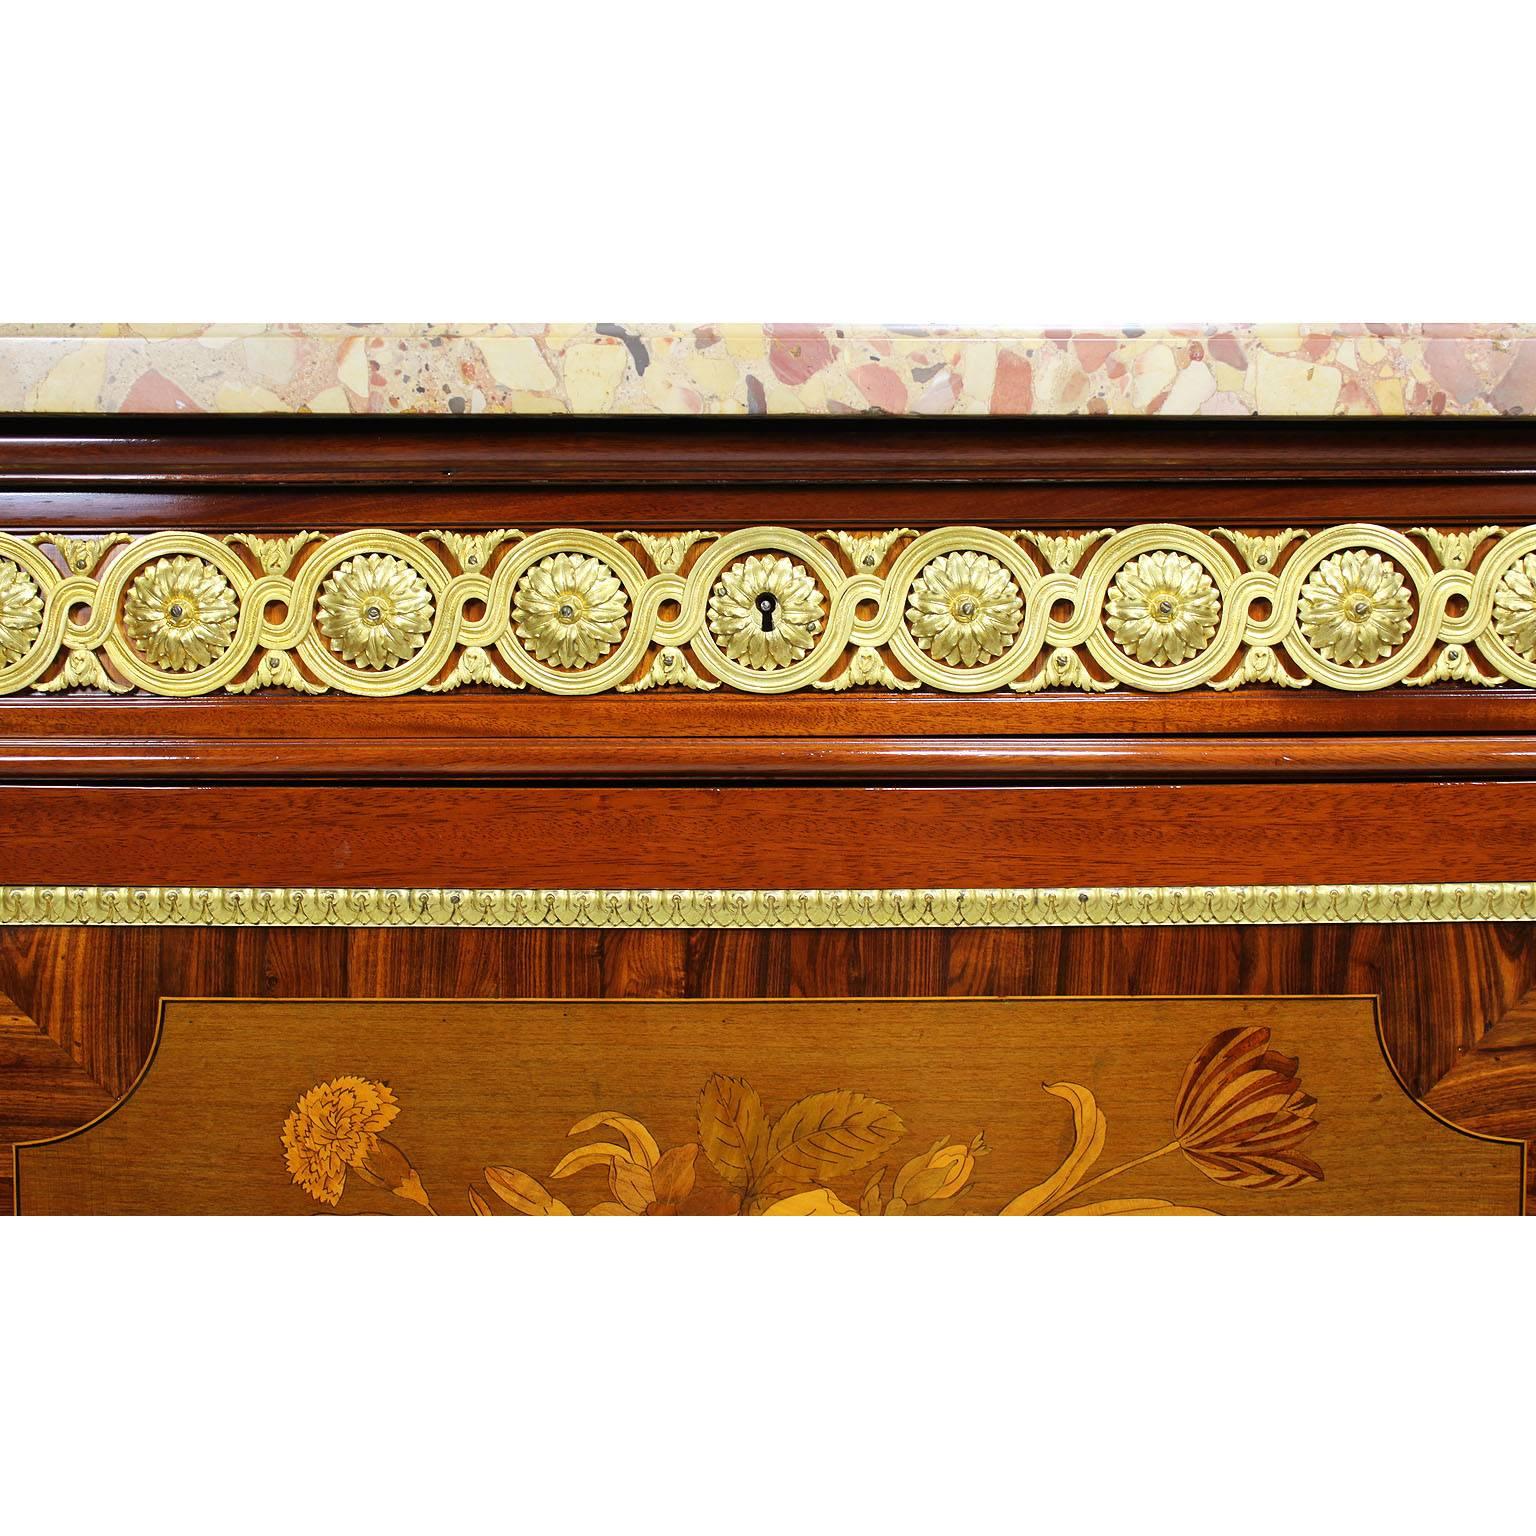 Carved Fine 19th Century Louis XVI Style Neoclassical Commode after Jean-Henri Riesener